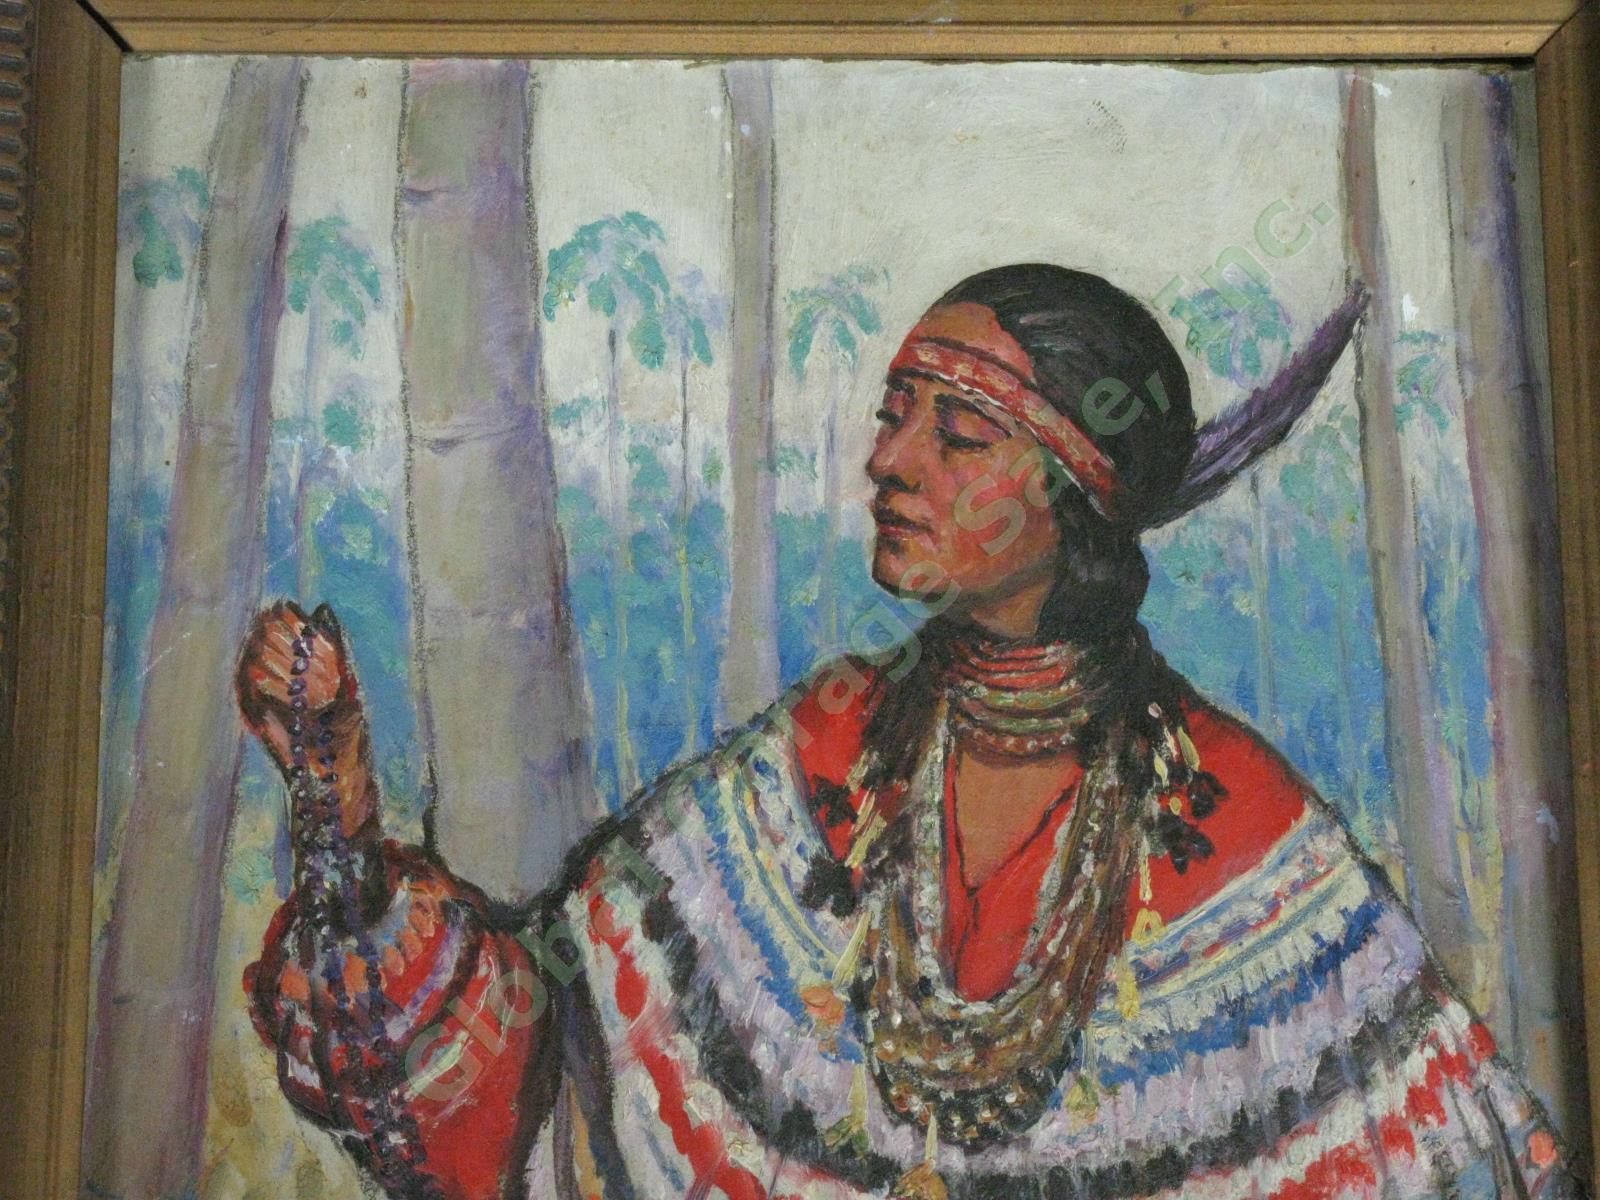 Antique 1927 Oil Painting Native American Woman w/ Jewelry Feather Headpiece NR 1